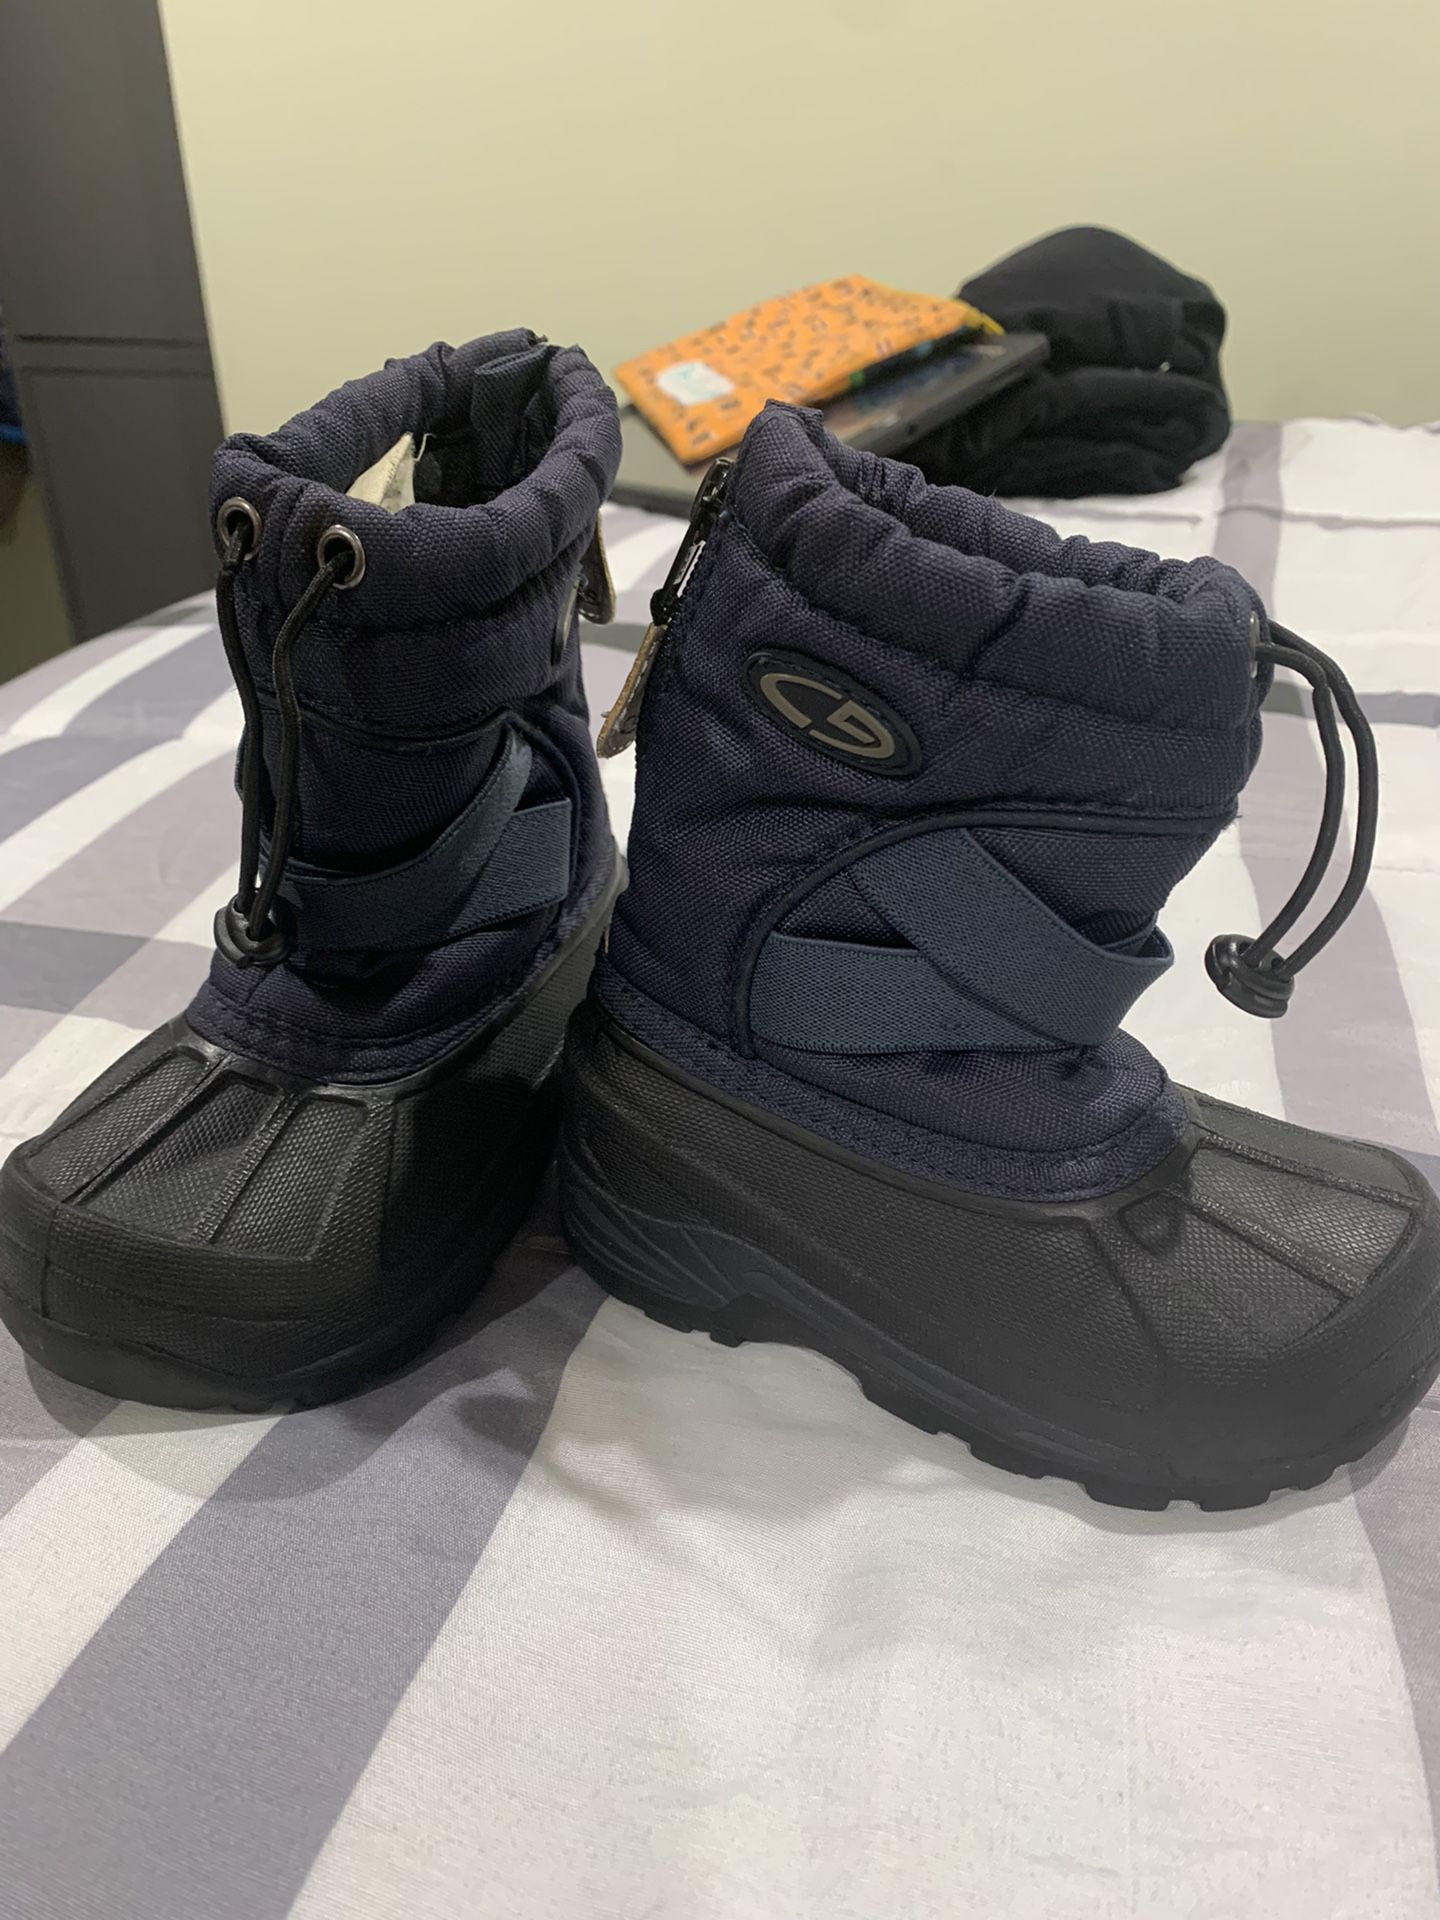 Snow boots (size 7T)